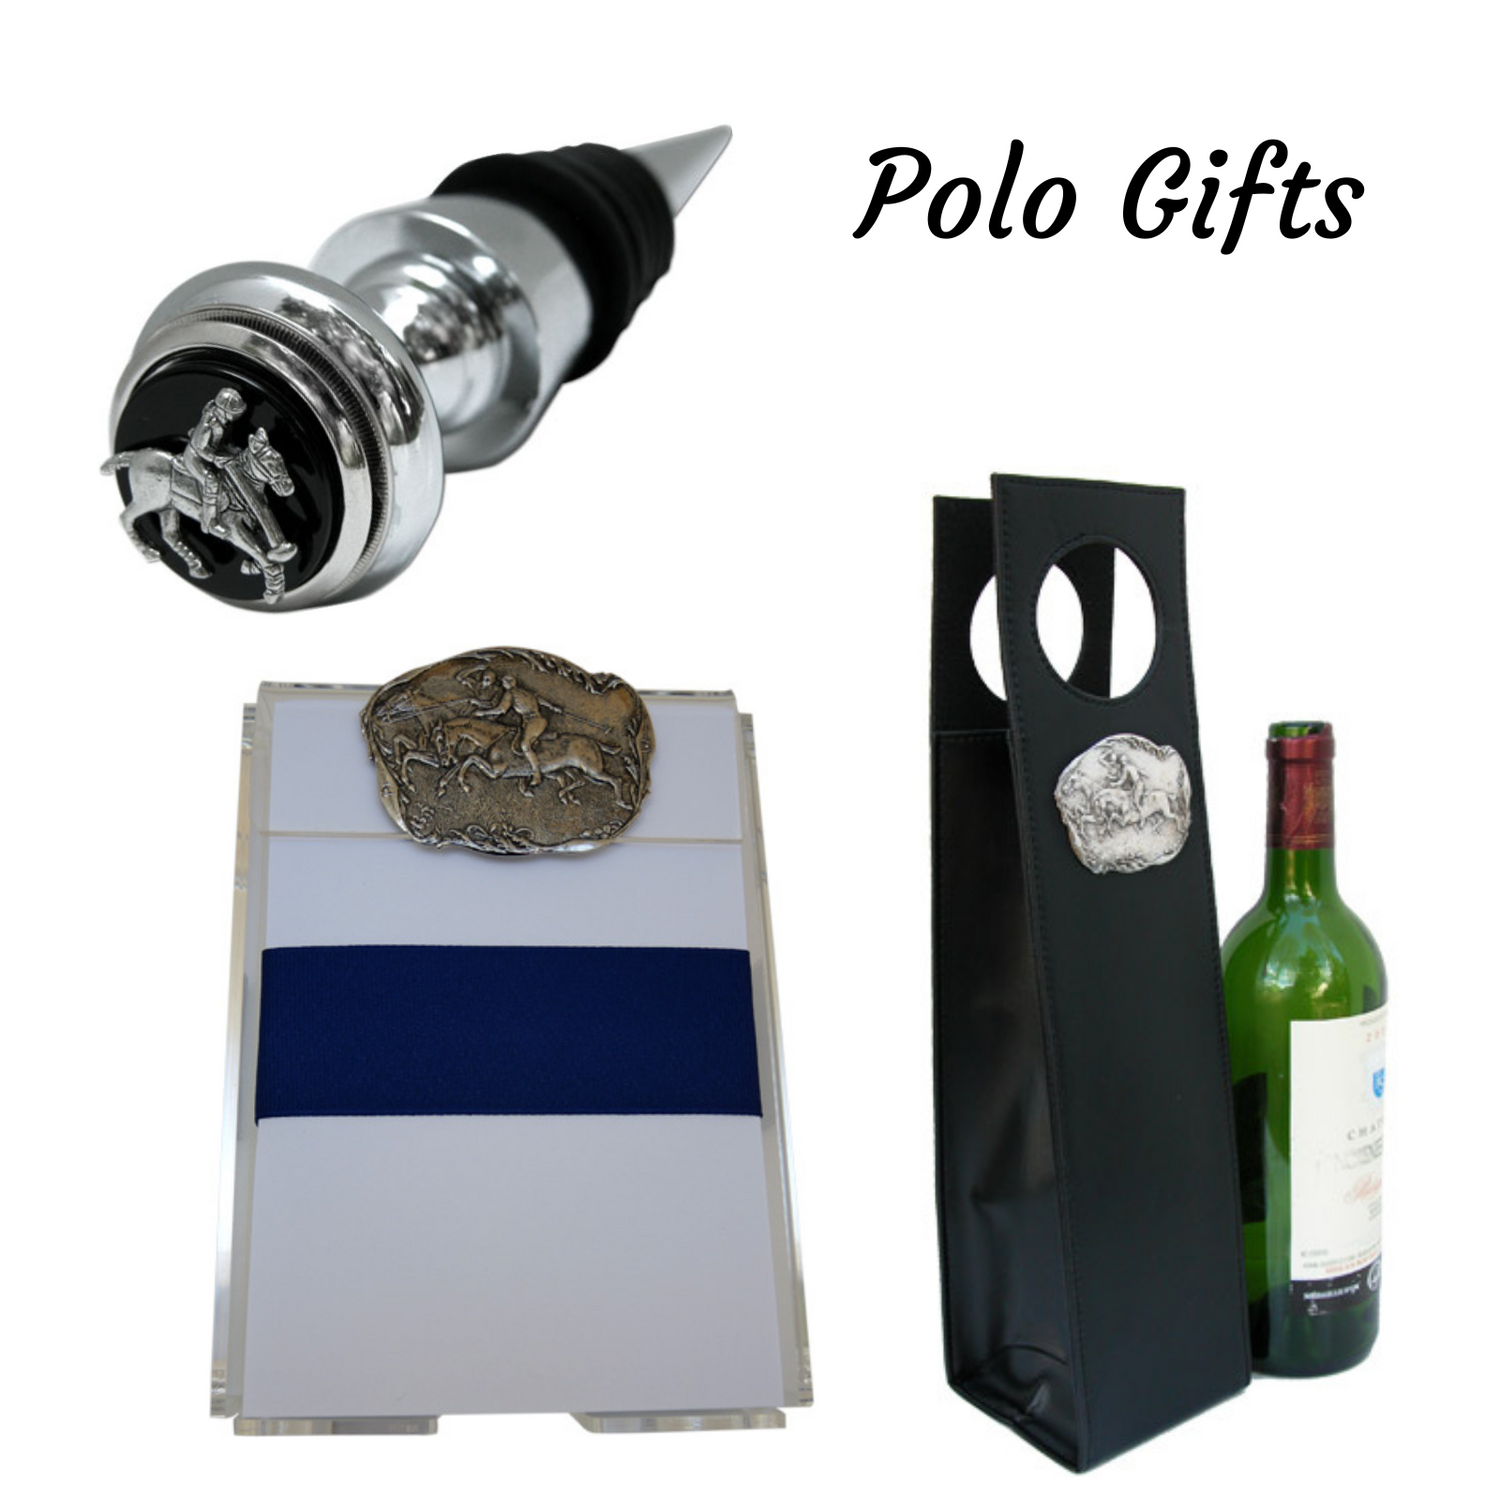 Polo Horse Theme Gifts